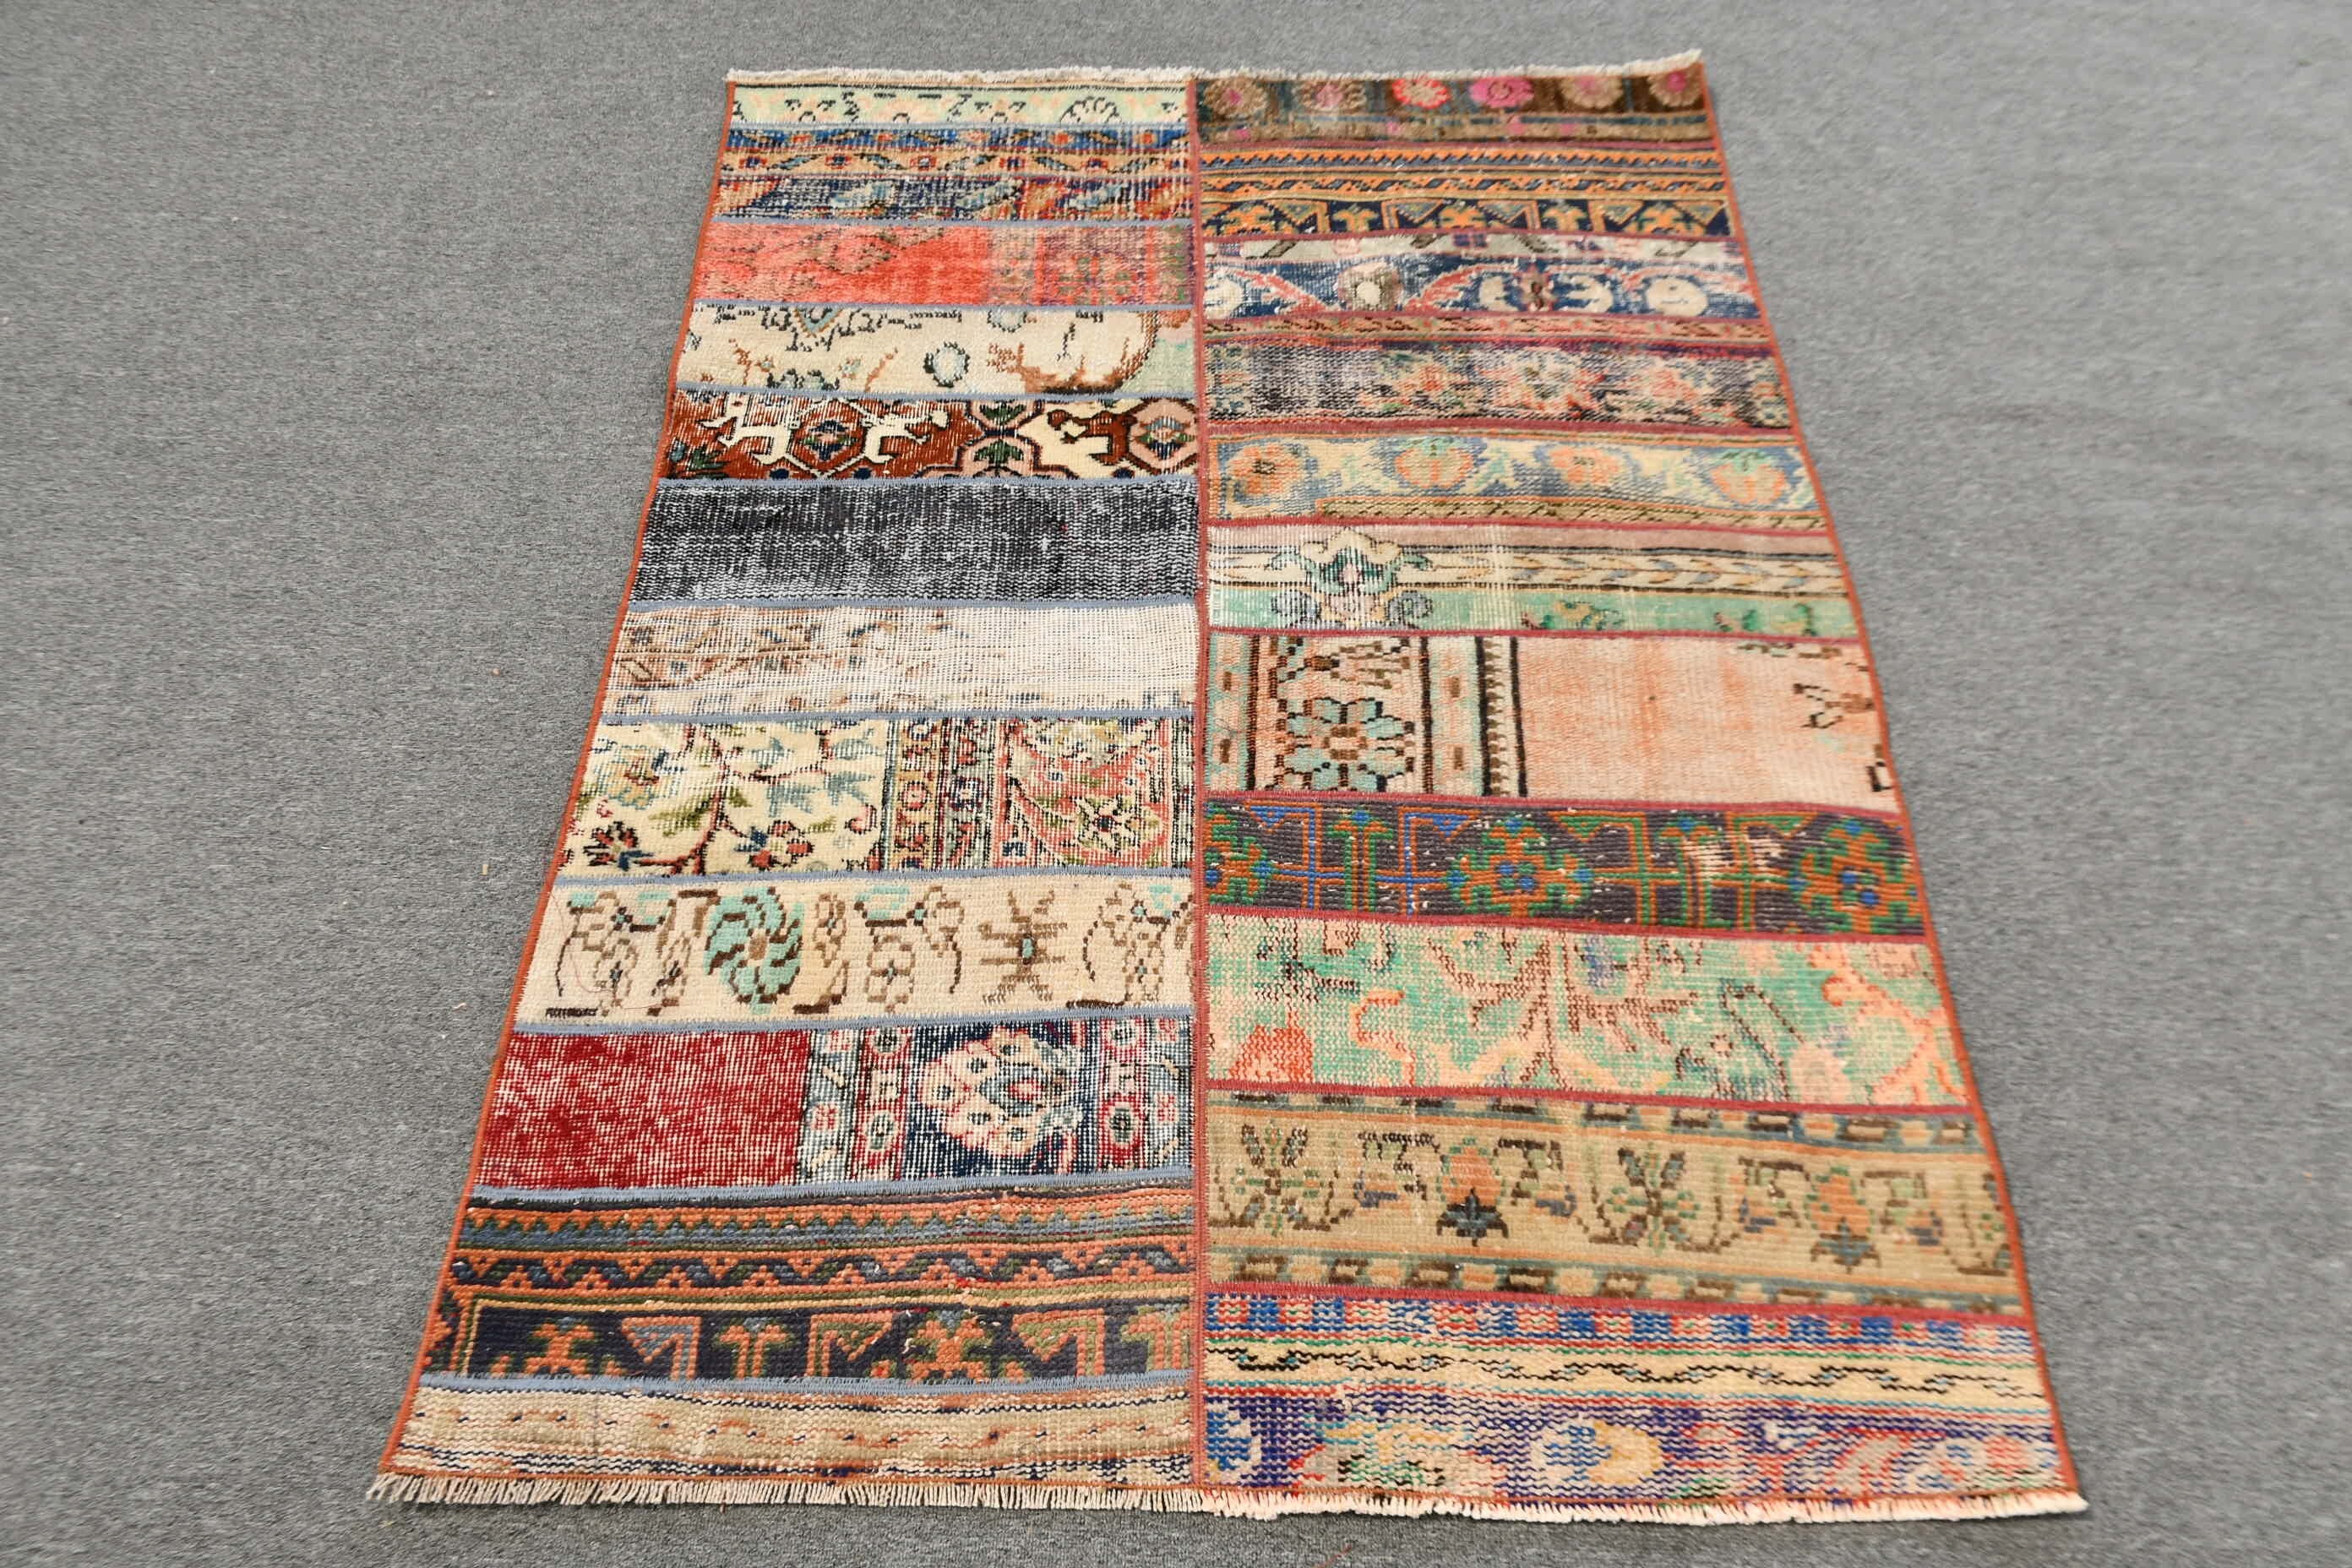 3.7x5.1 ft Accent Rug, Cool Rugs, Antique Rugs, Blue Moroccan Rug, Rugs for Kitchen, Bedroom Rug, Turkish Rugs, Vintage Rug, Kitchen Rug